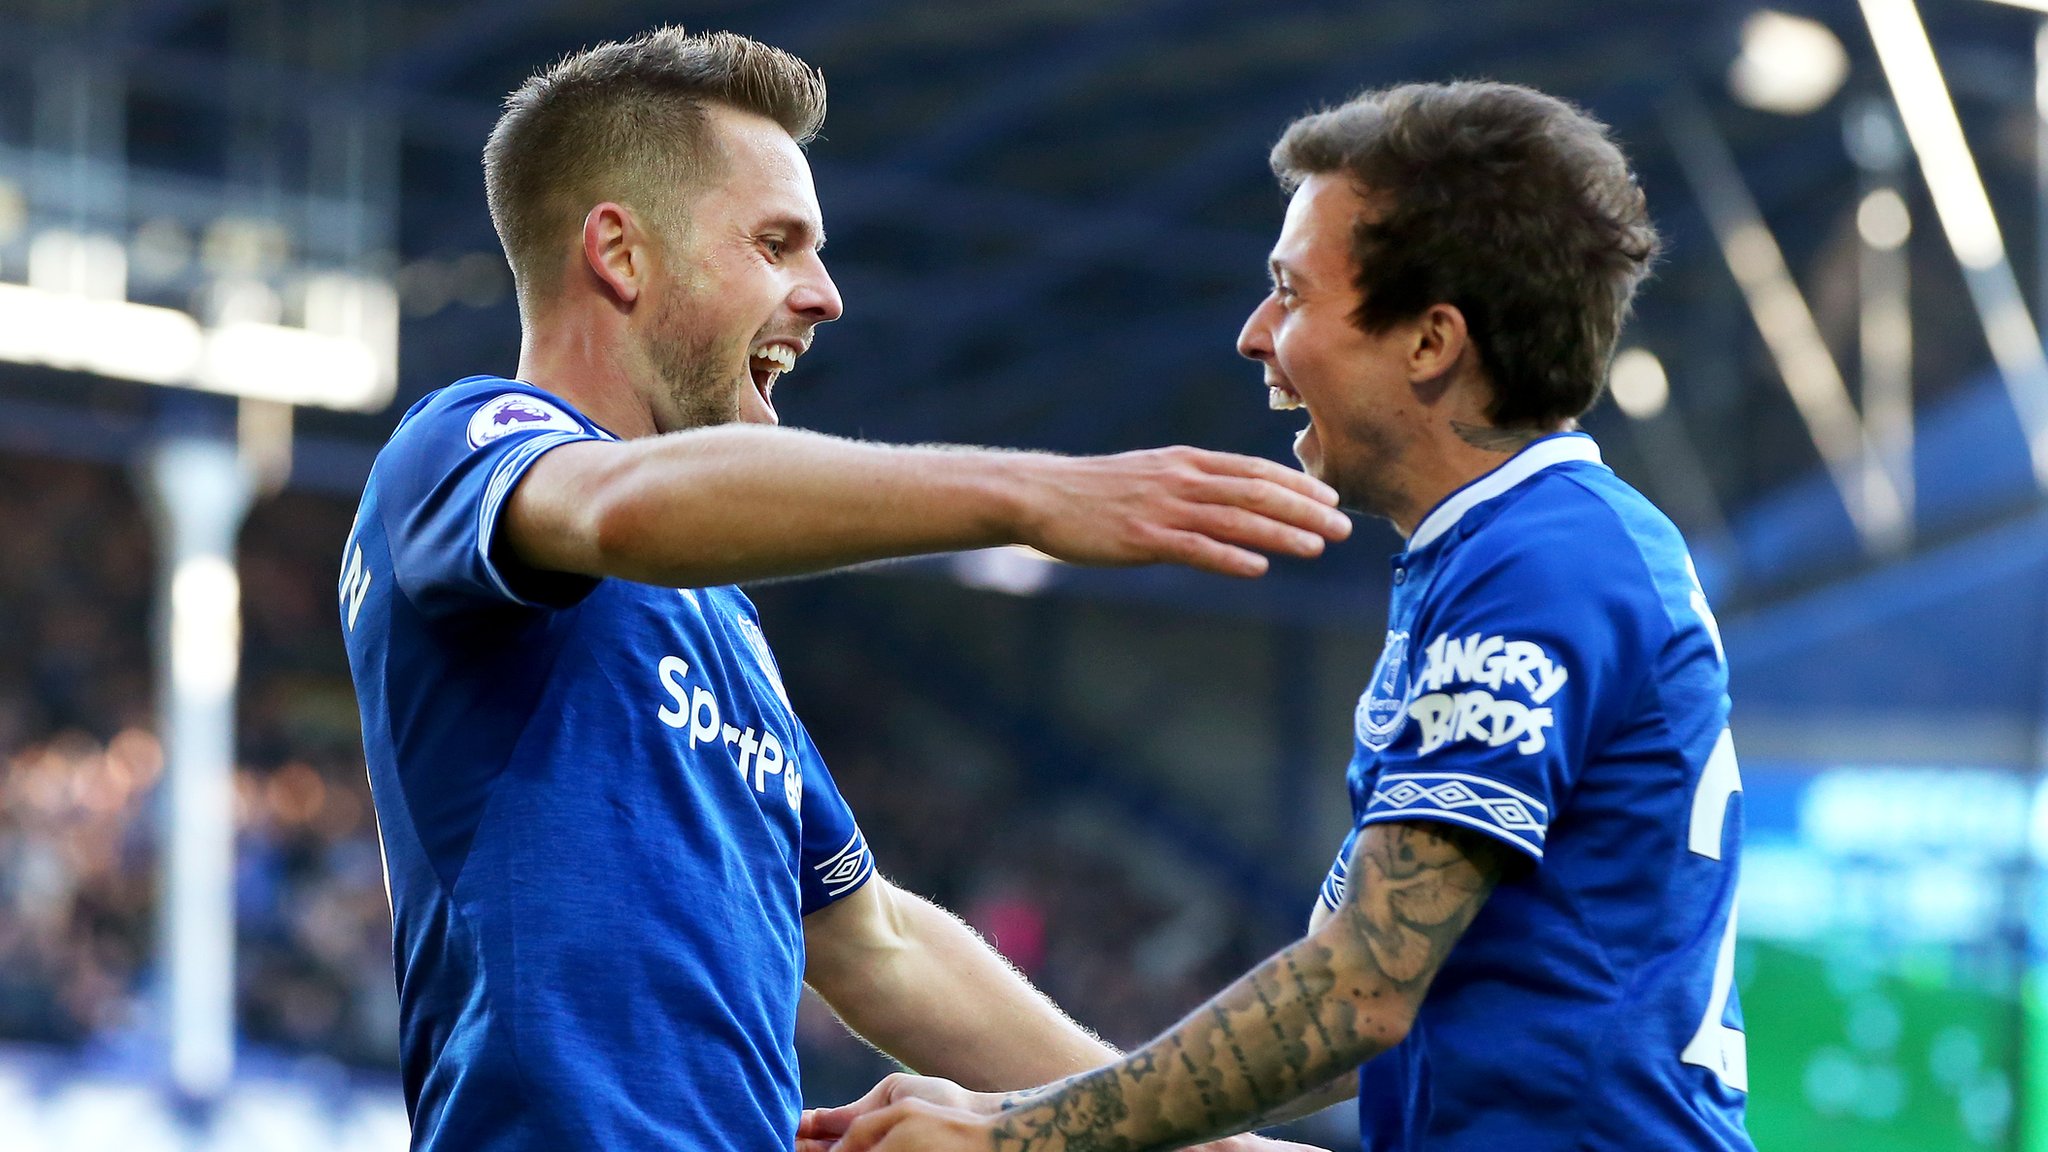 Sigurdsson stars as Everton enjoy 22nd straight home league win over Fulham